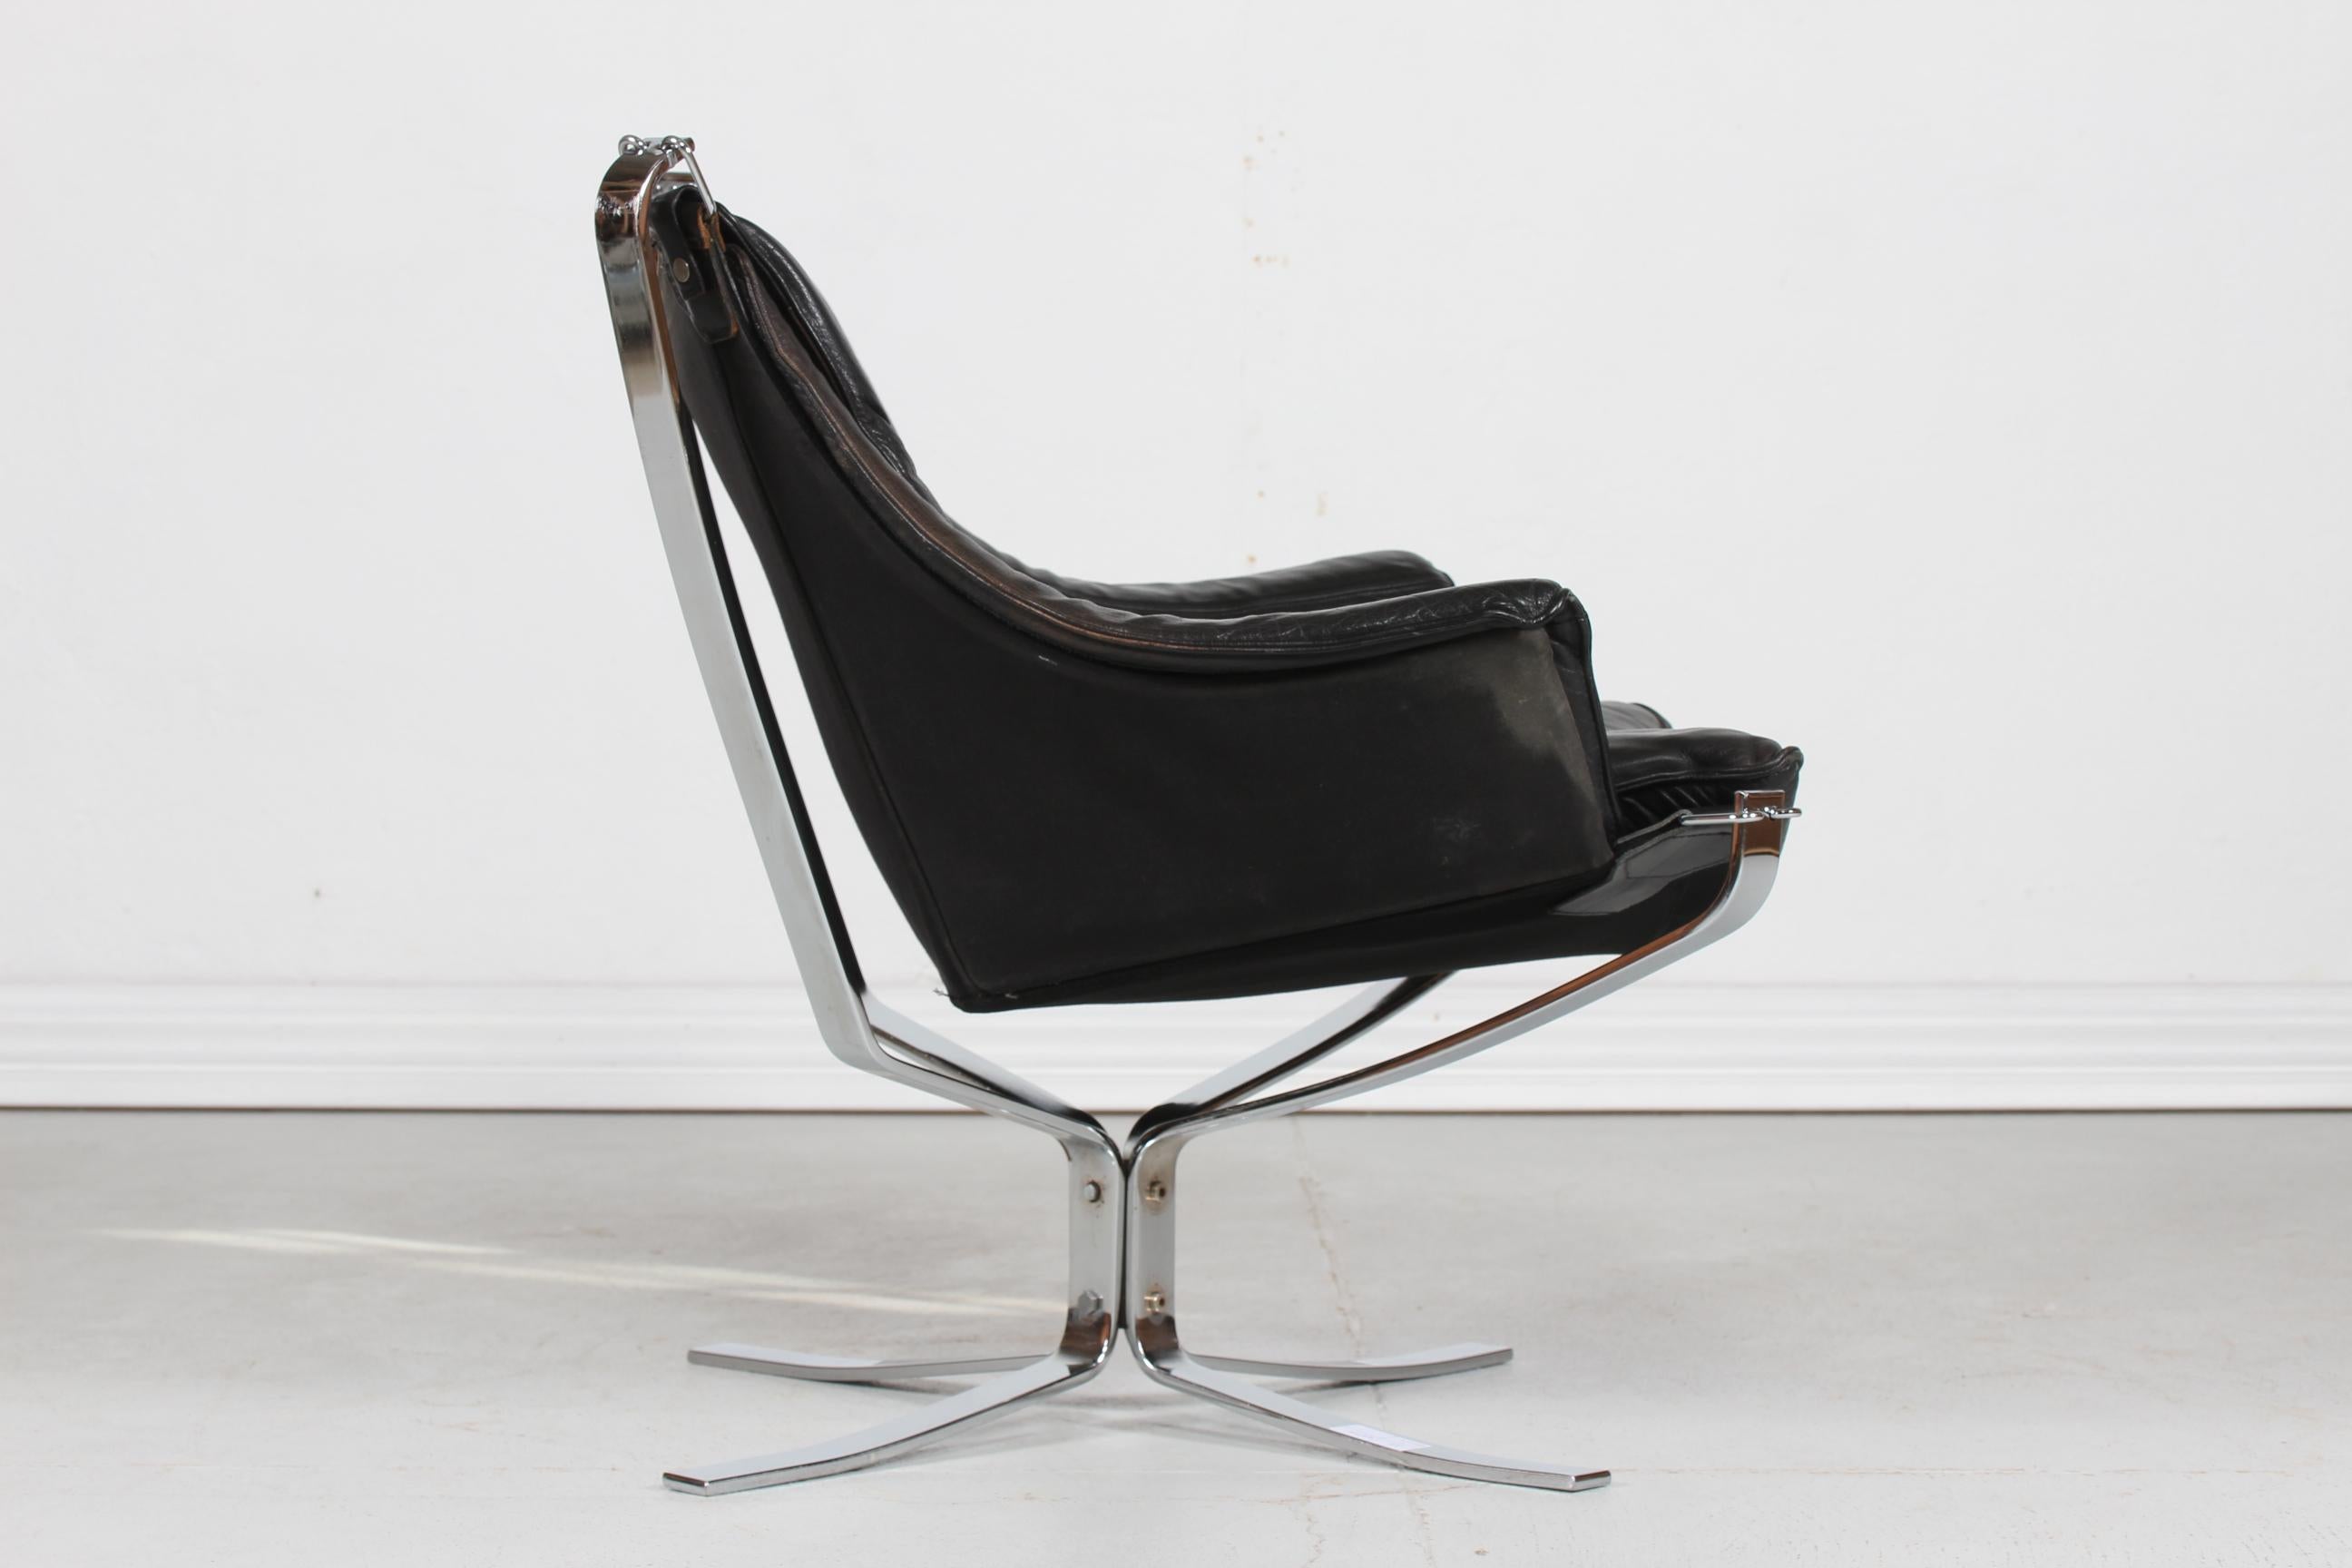 Super rare Falcon chair with armrest and chrome steel base.
The cushions are upholstered with genuine black leather in very good and strong quality.
The chair is made by Swedish Vatne Møbler in the 1970s.